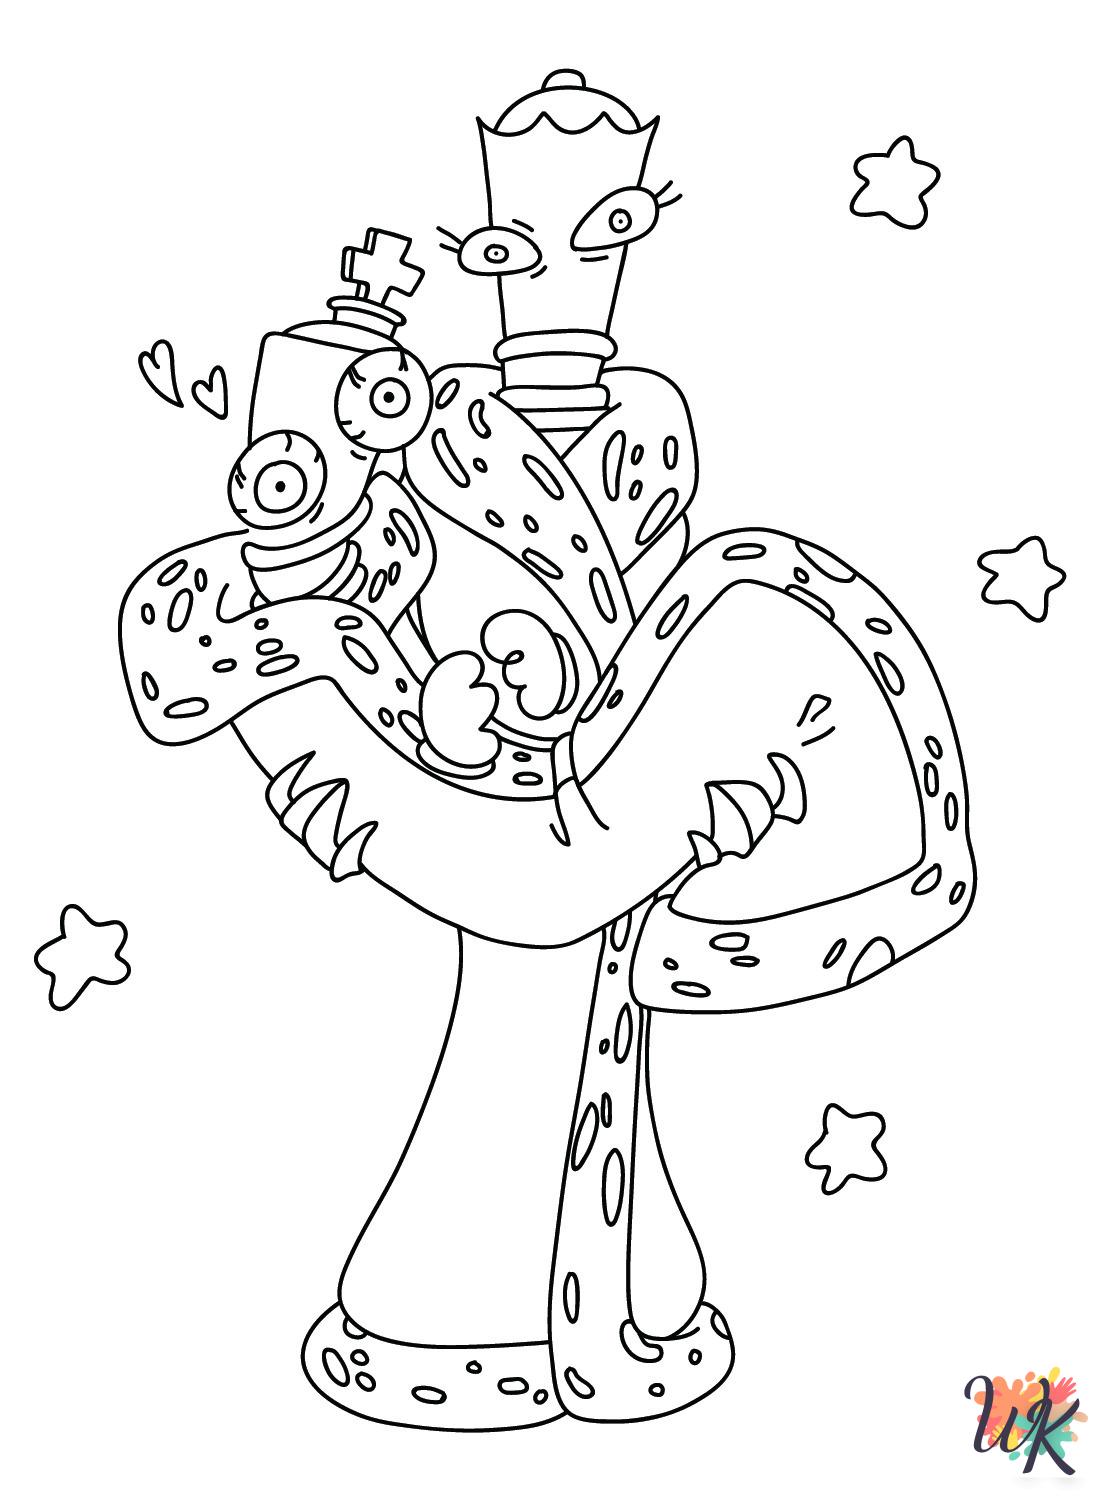 The Amazing Digital Circus Coloring Pages 42